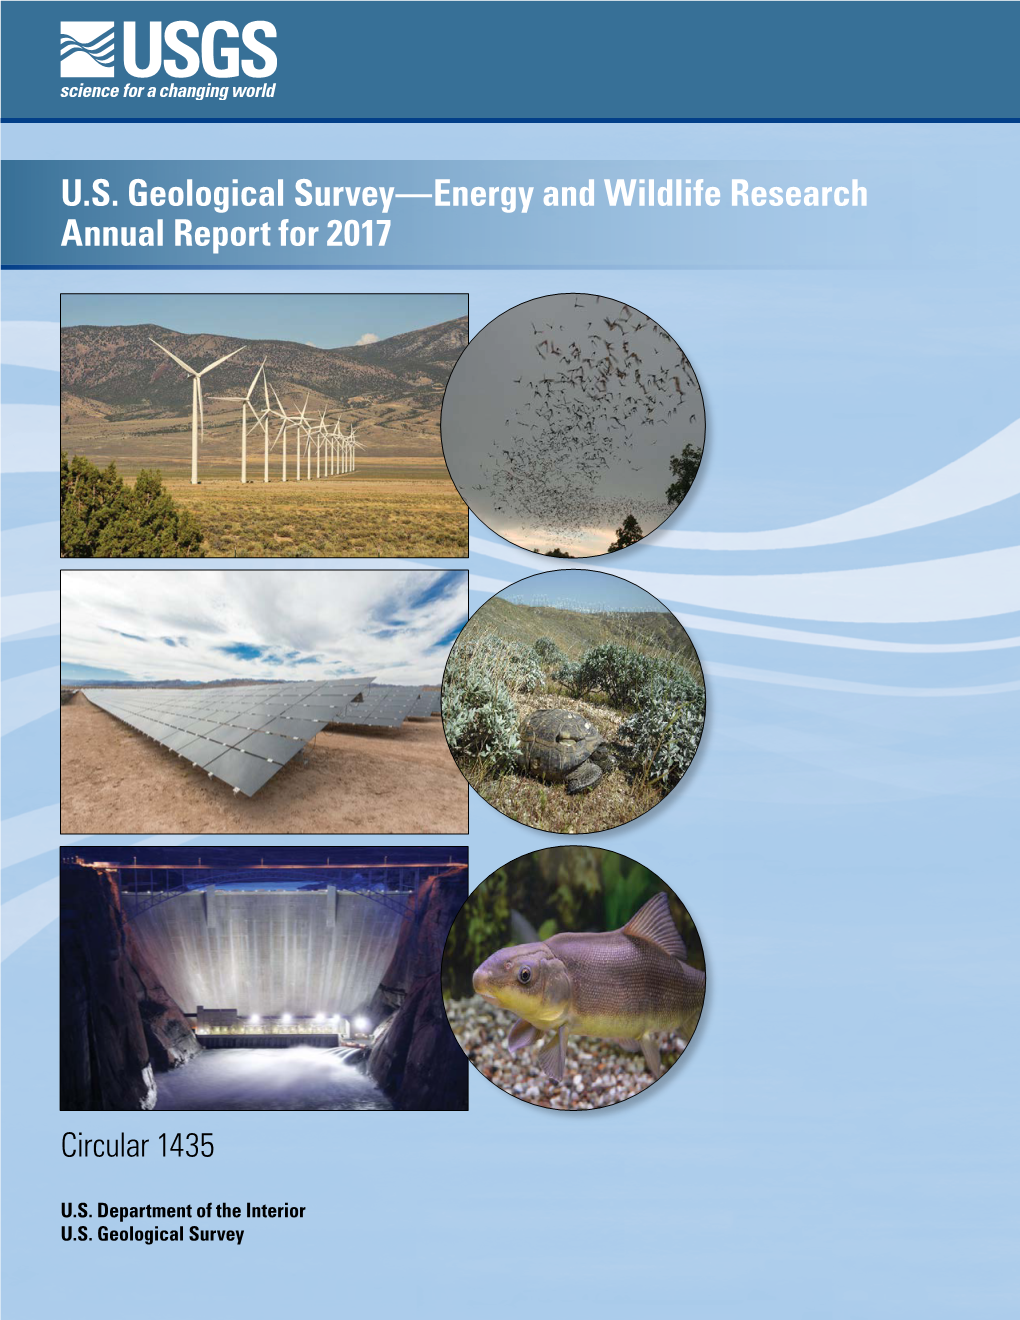 U.S. Geological Survey Energy and Wildlife Research Annual Report For